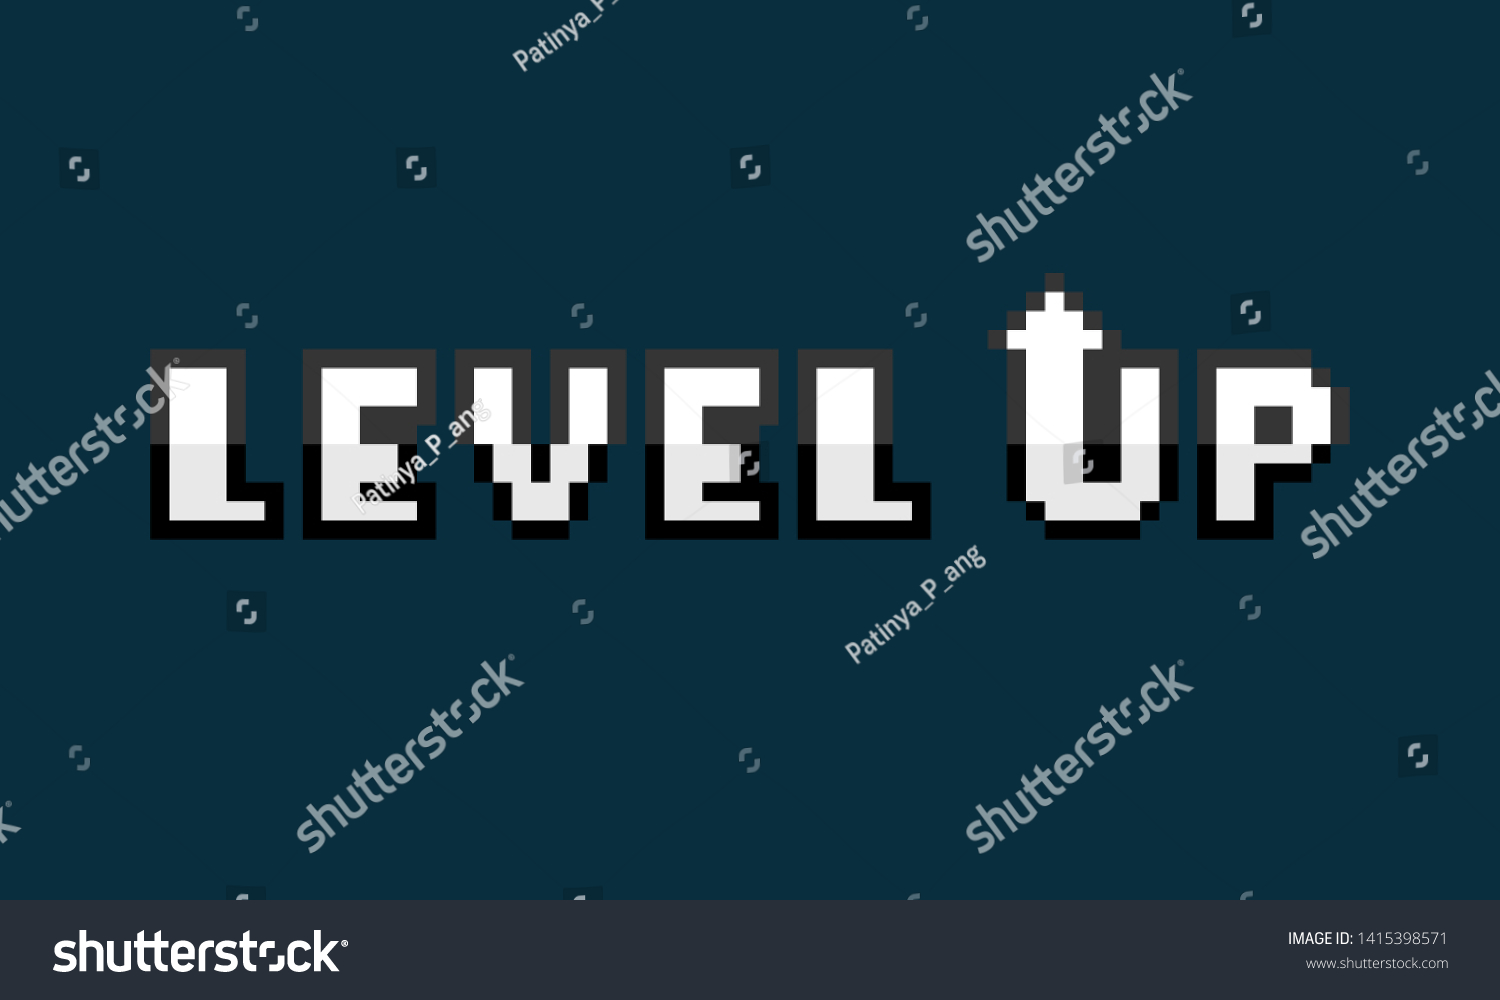 How do you level up steam levels фото 43